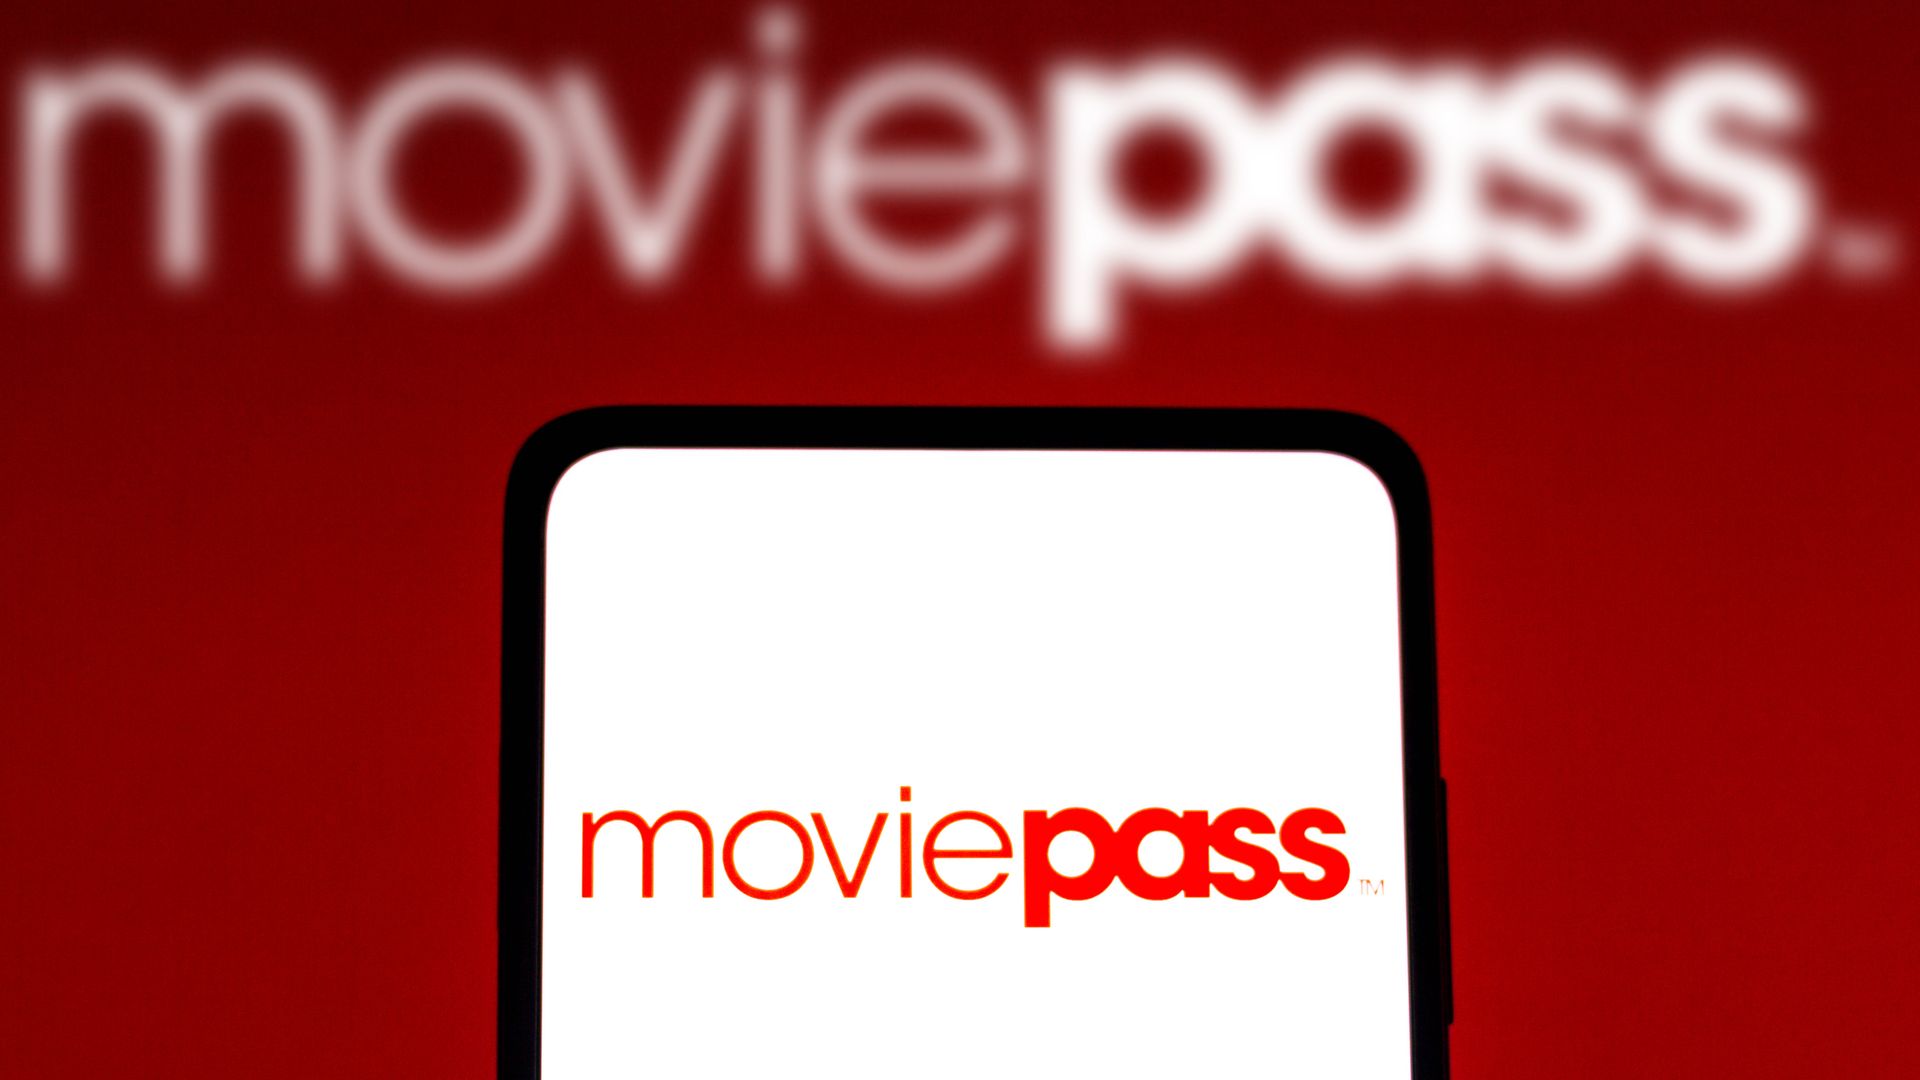 MoviePass seen on a mobile phone and on red background behind it